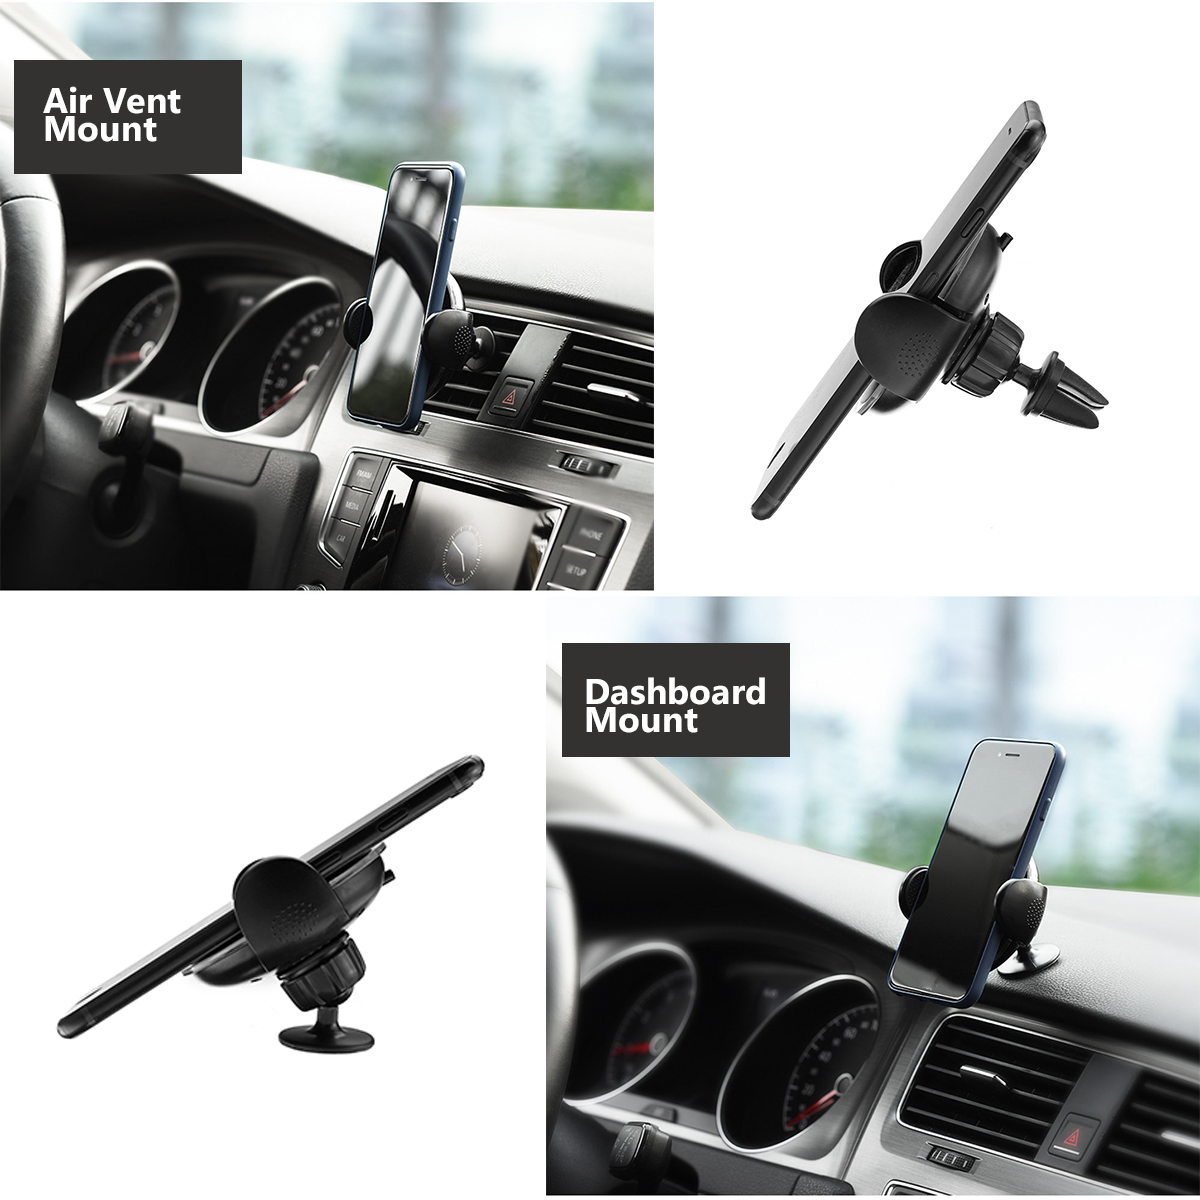 Bakeey-Wireless-Fast-Car-Charger-Two-Mount-Holder-Stand-For-iPhone-8P-iPhone-X-Samsung-S8-1252095-4